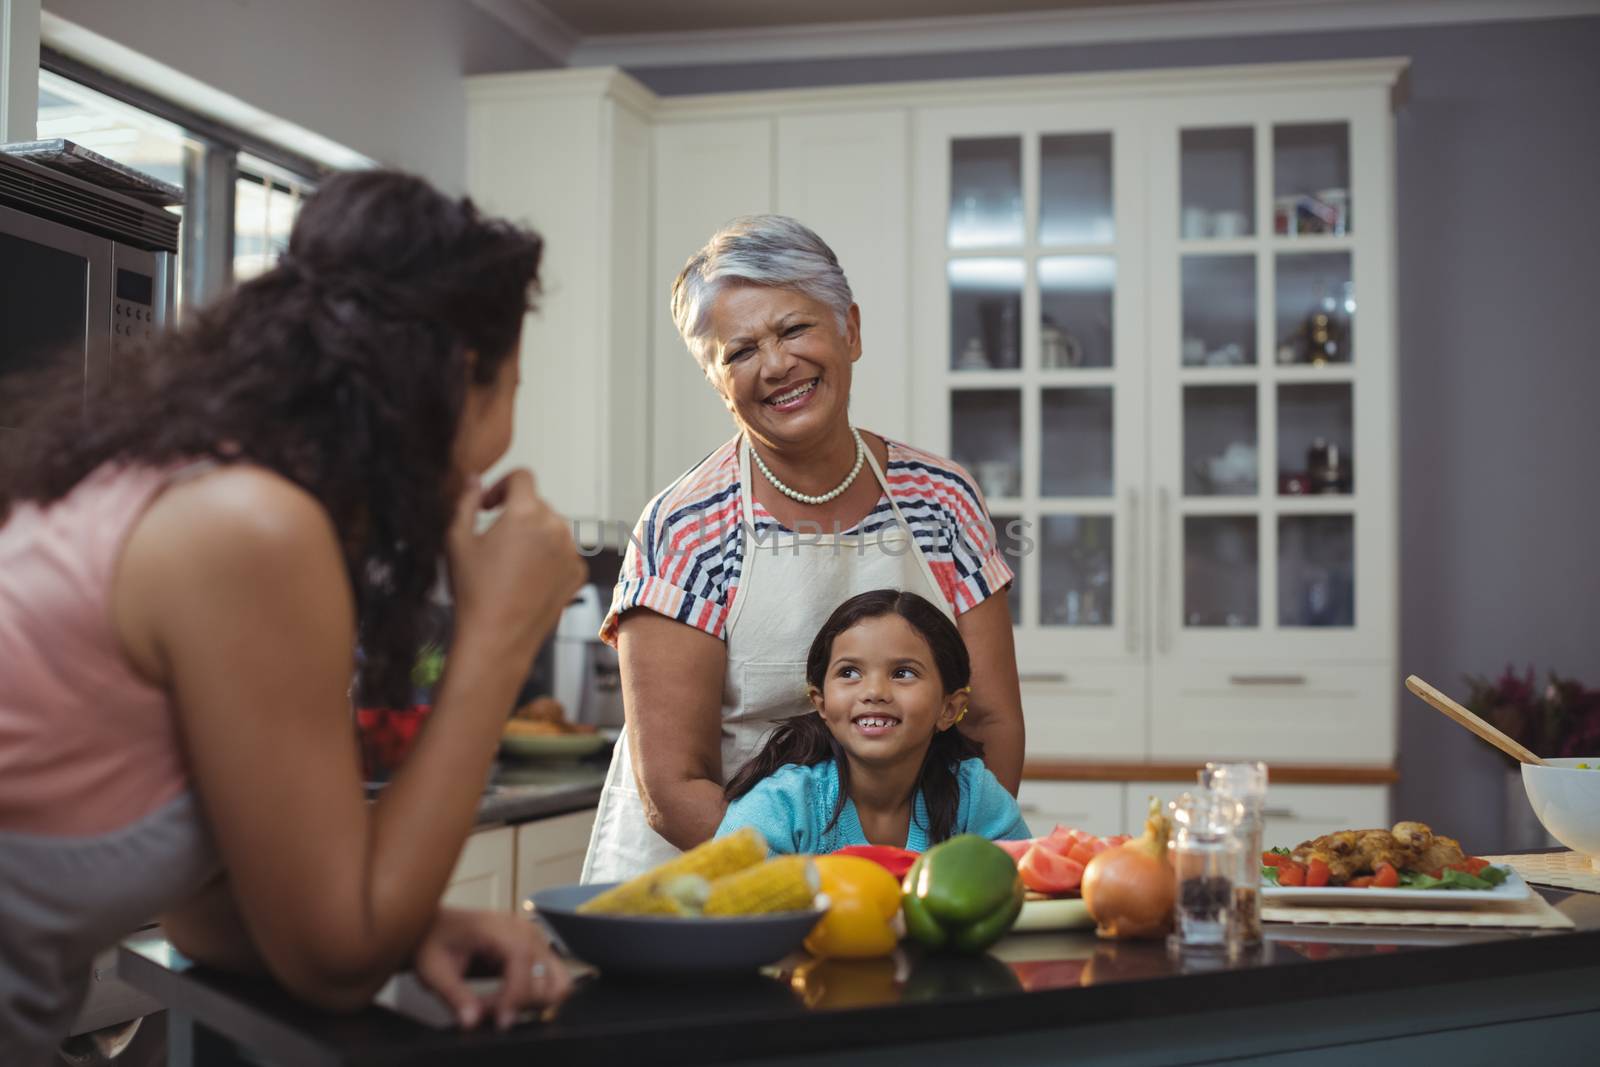 Smiling family interacting with each other in kitchen by Wavebreakmedia